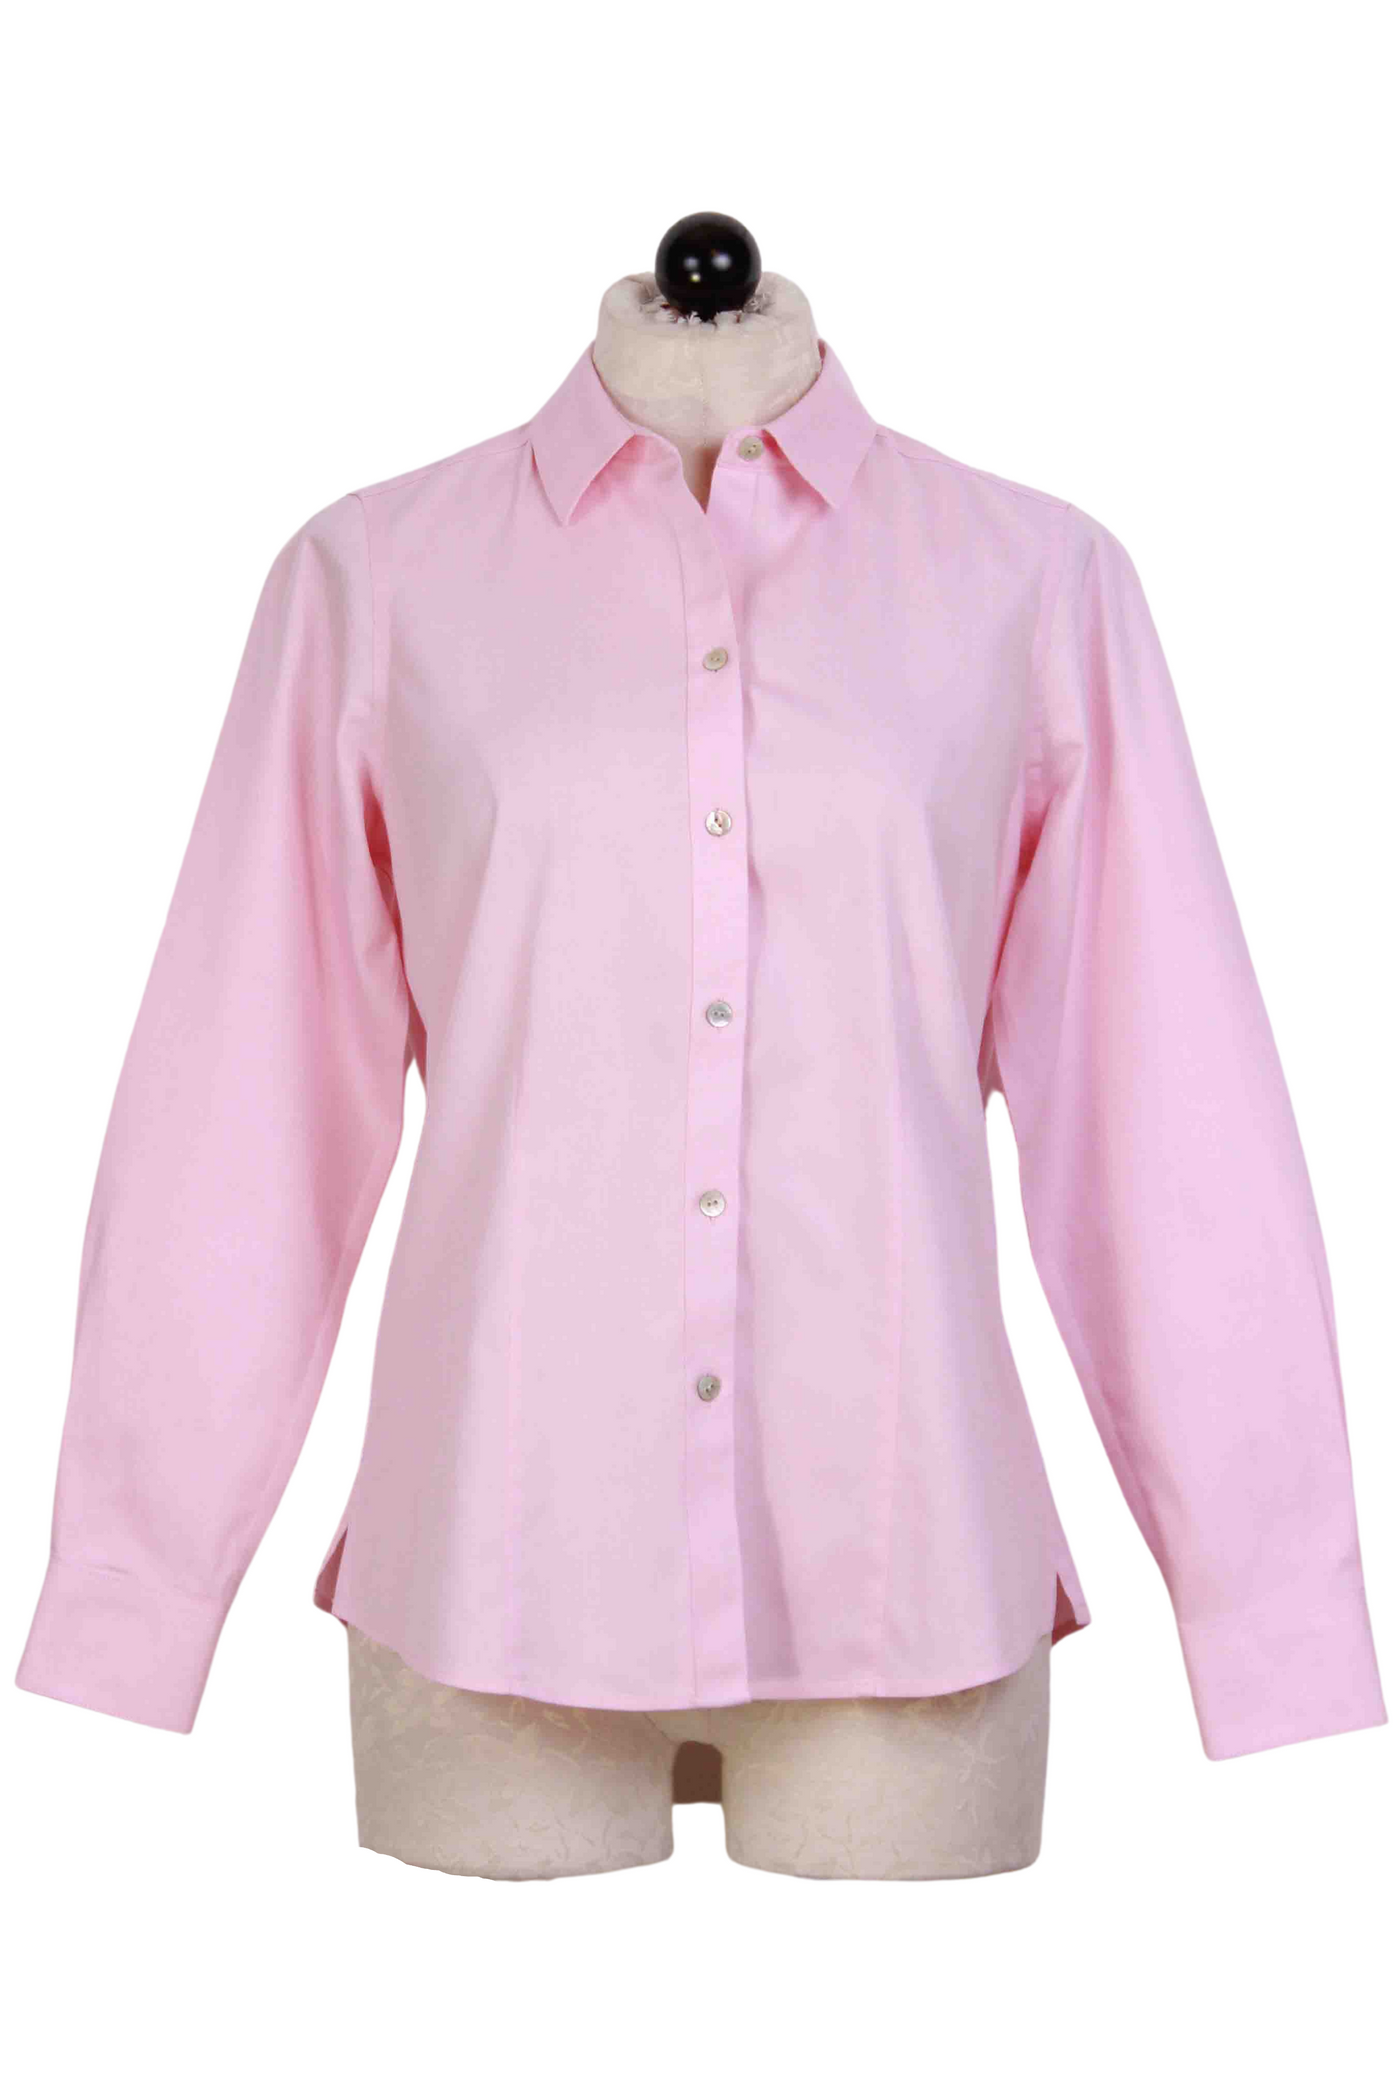 Chambray Pink Classic collared, tailored Dianna blouse by Foxcroft